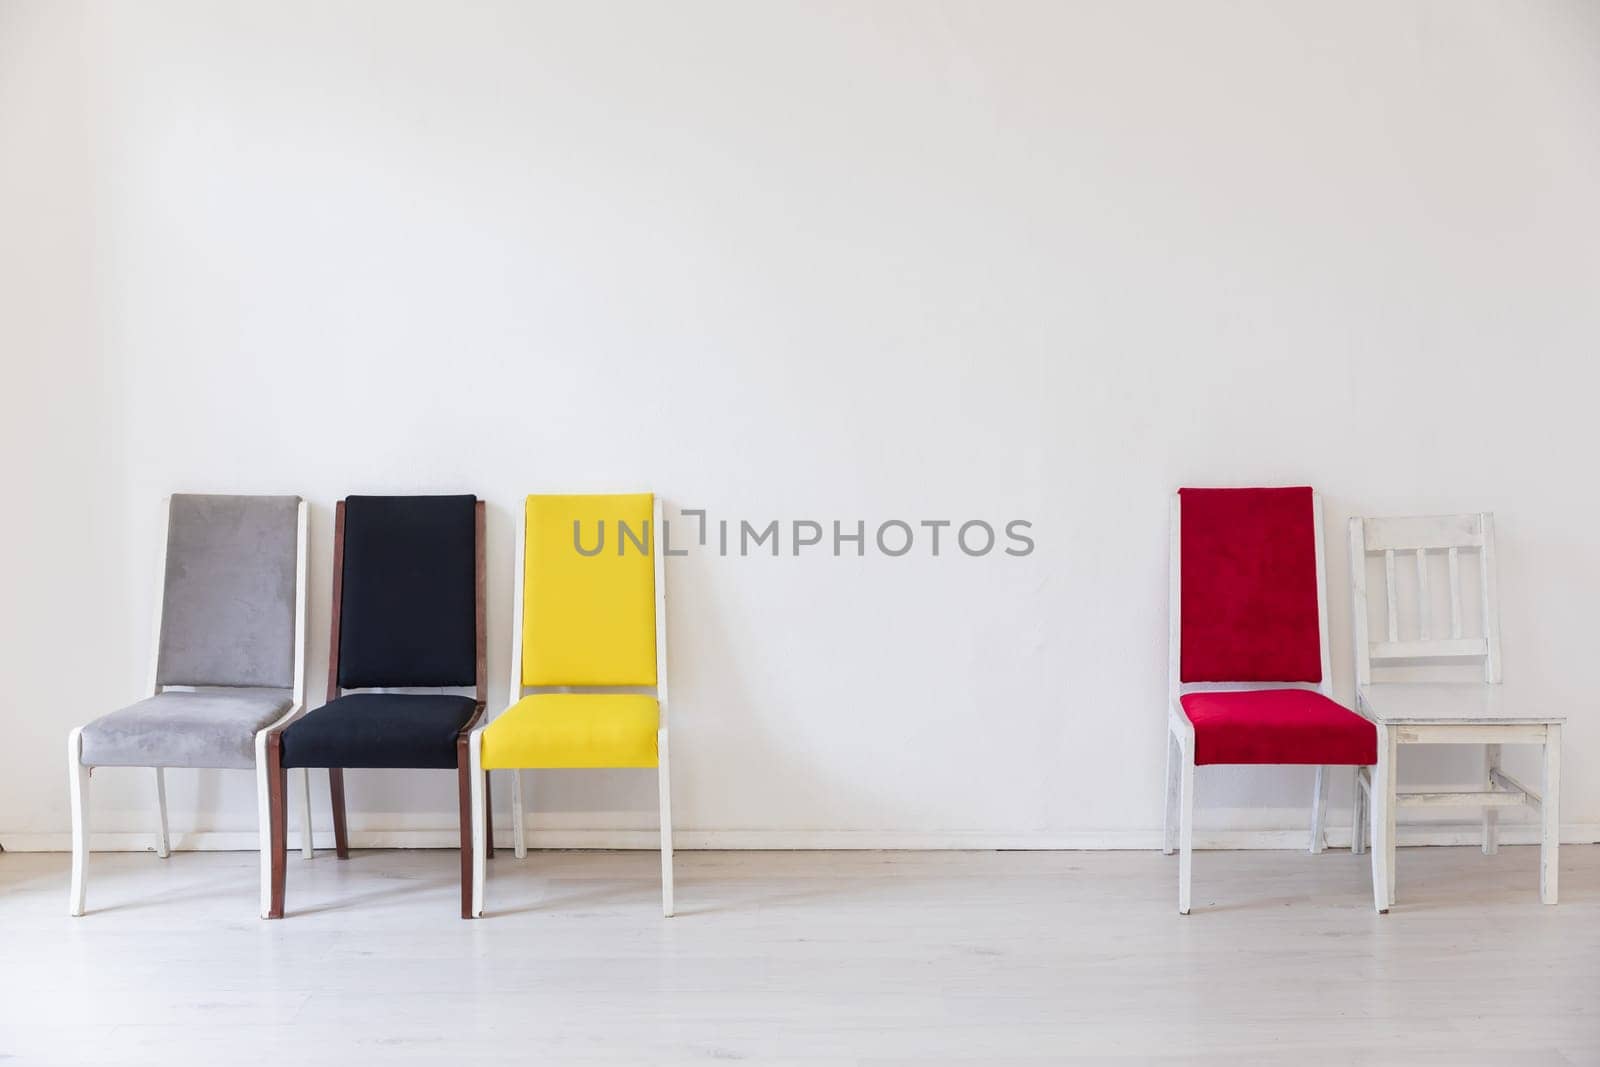 a yellow grey red black chairs in the interior of the white room